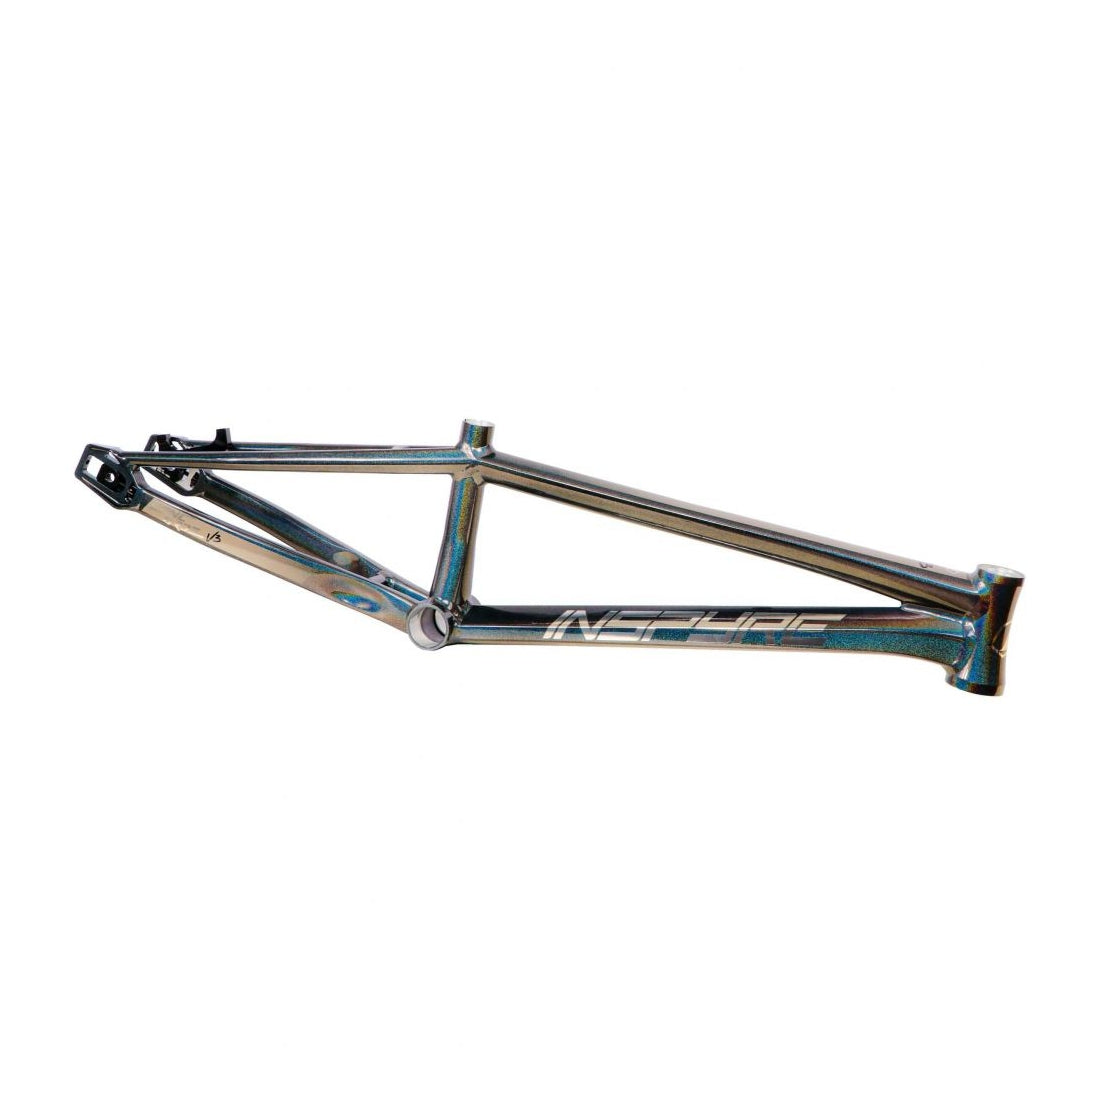 Inspyre Concorde V3 Pro XXL Frame BMX bicycle frame isolated on a white background.